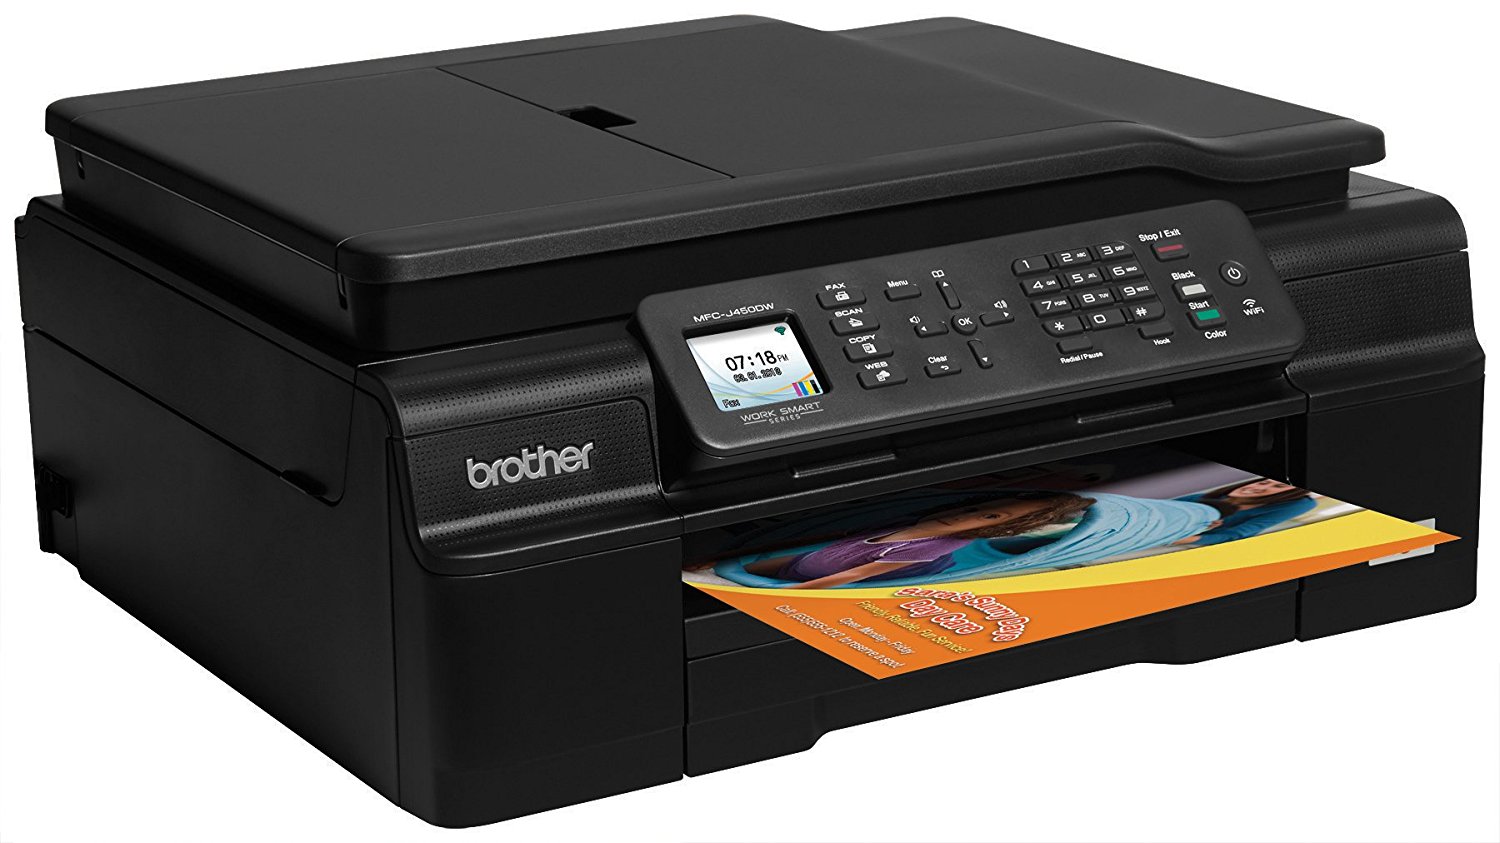 installing a brother printer